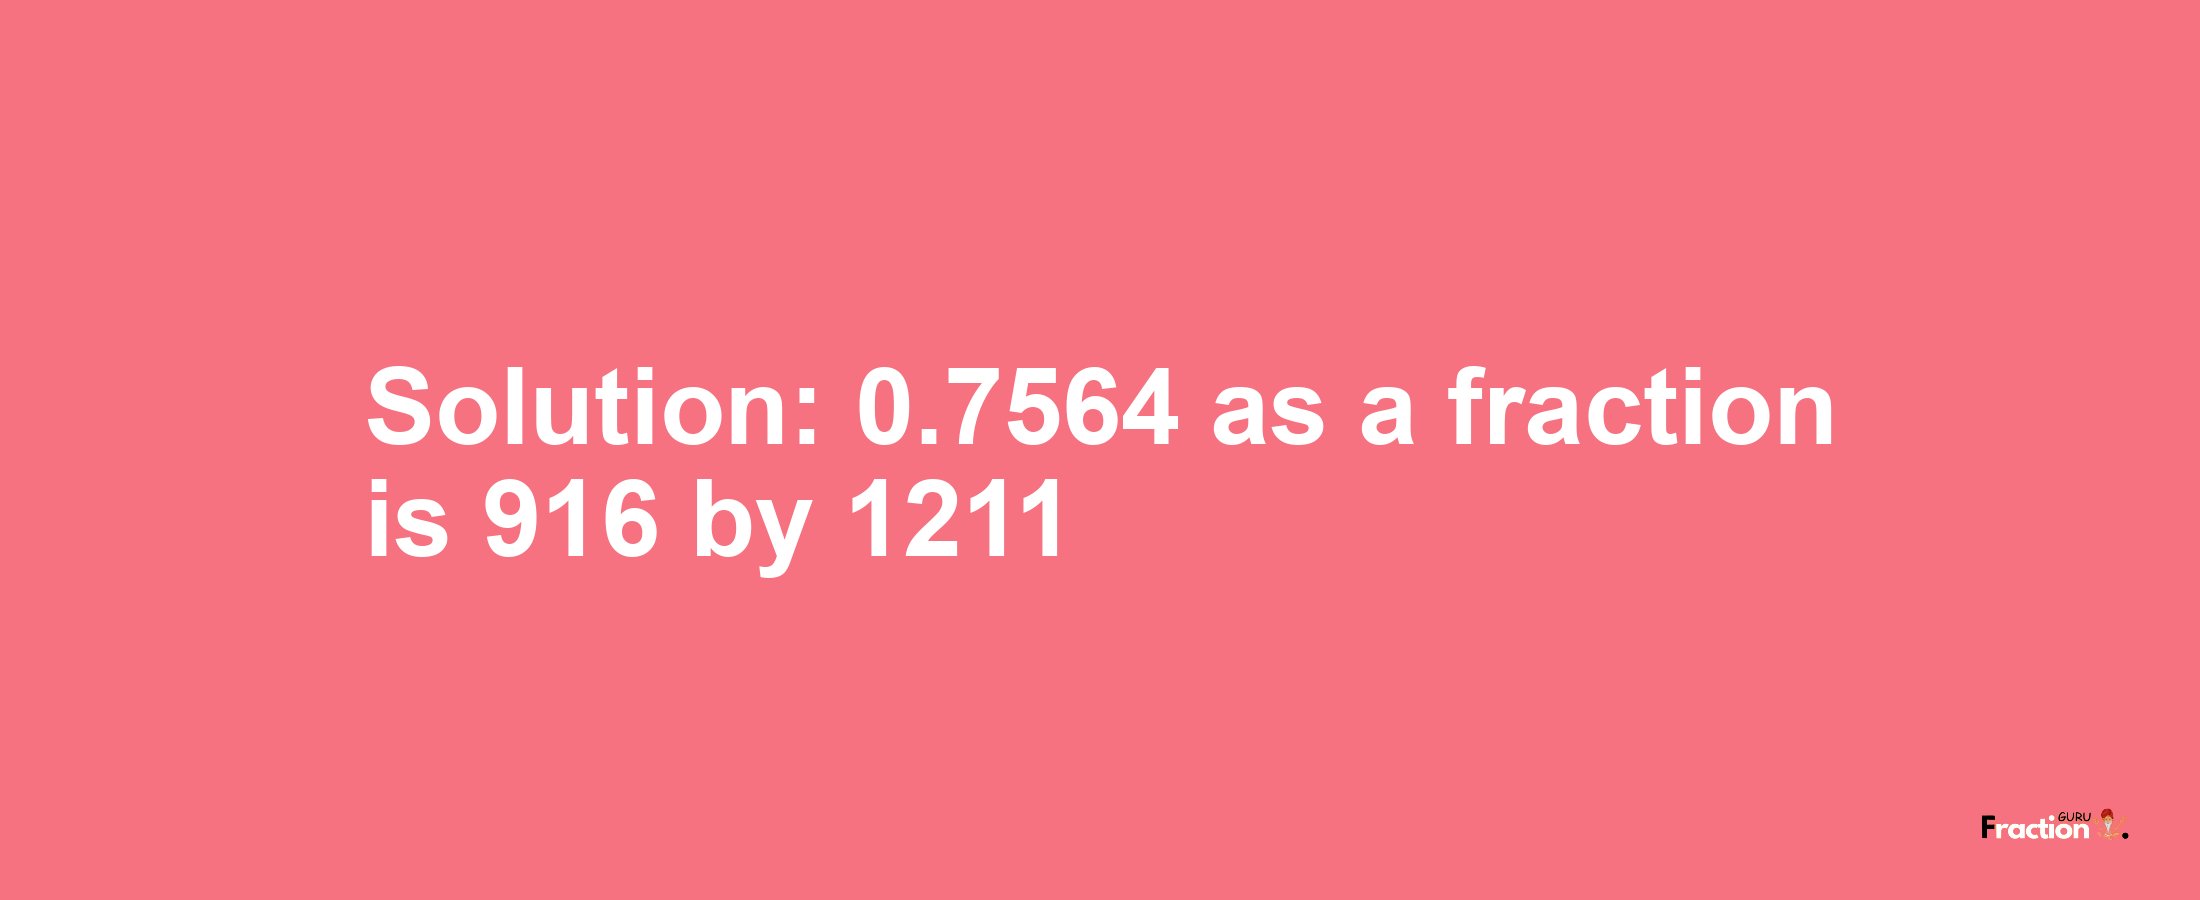 Solution:0.7564 as a fraction is 916/1211